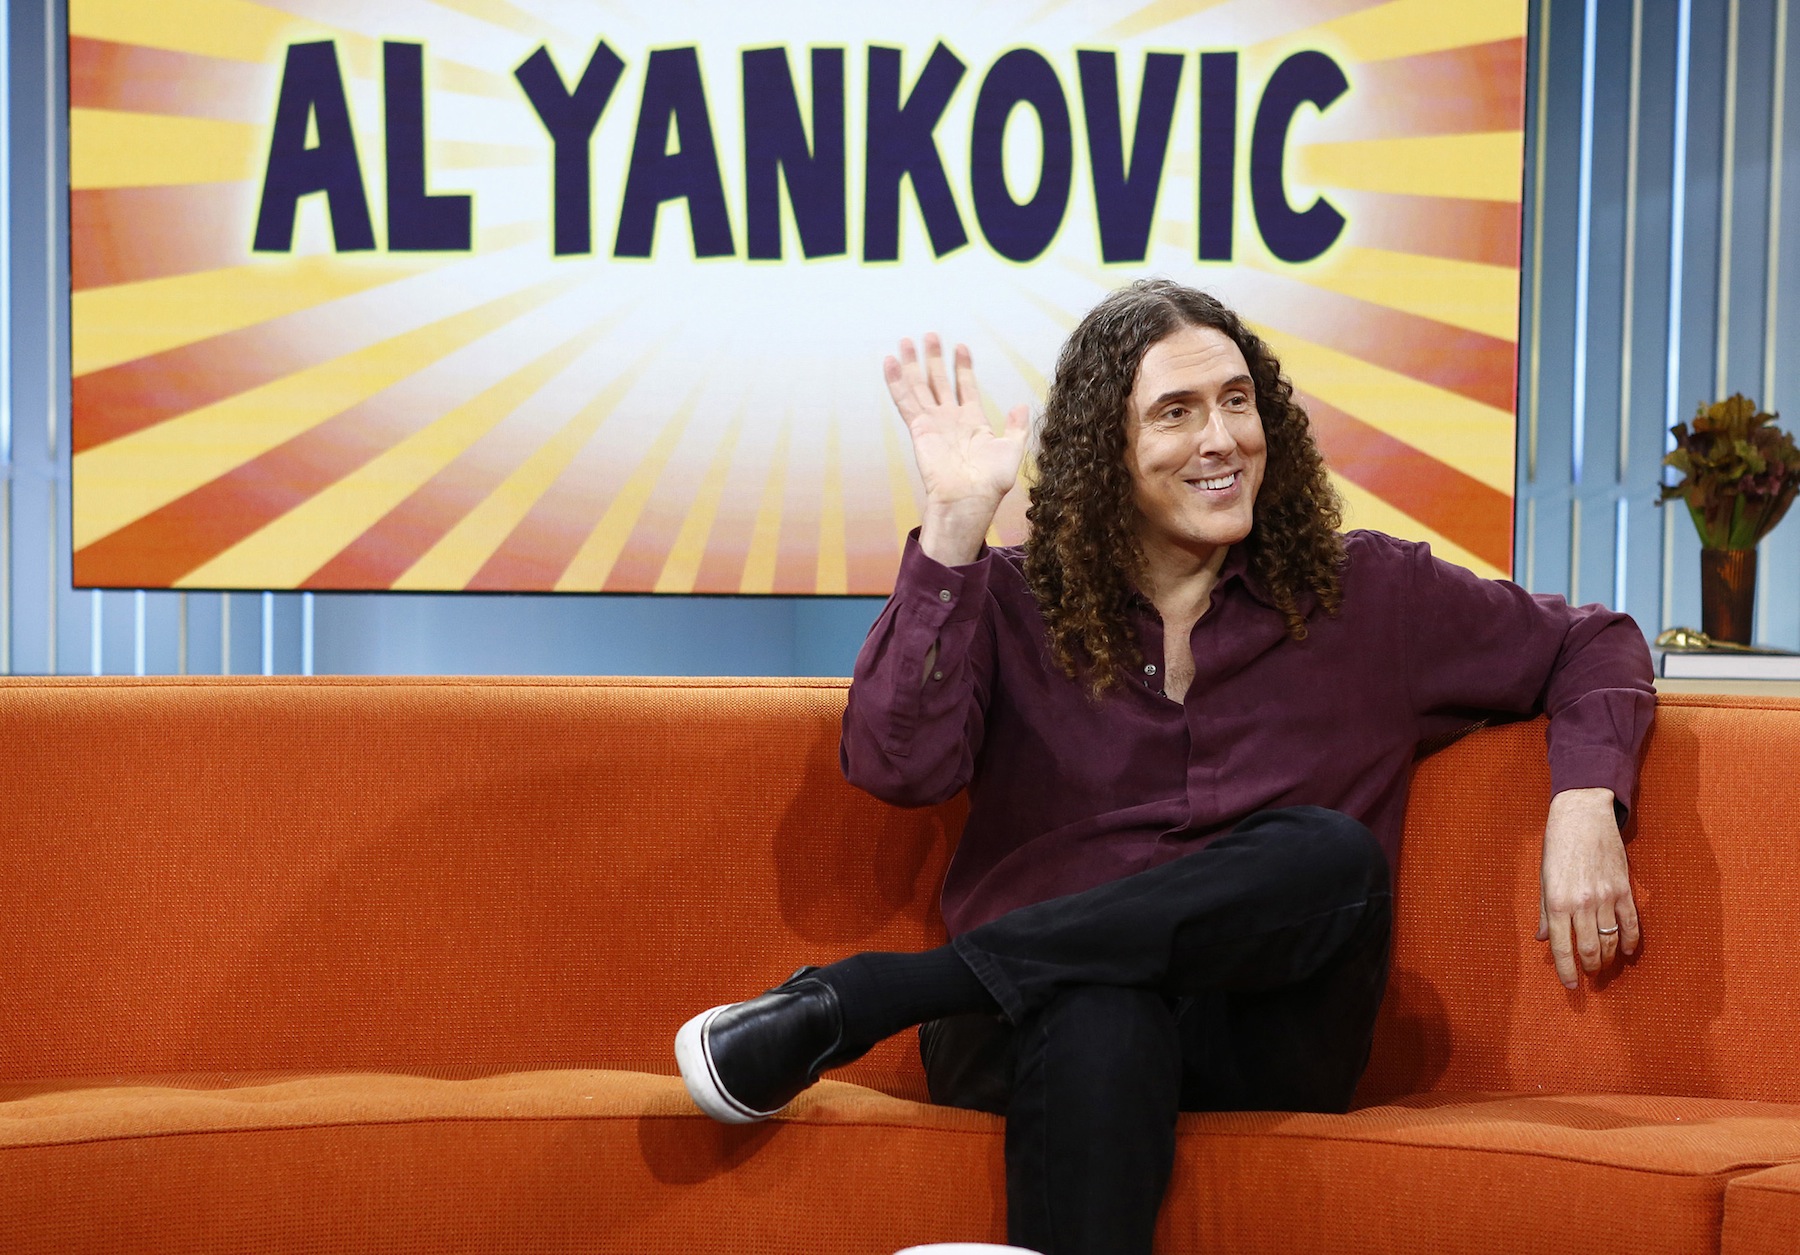 "Weird Al" Yankovic appears on NBC News' "Today" show on Sept. 26, 2013 (Peter Kramer—NBC NewsWire / Getty Images)